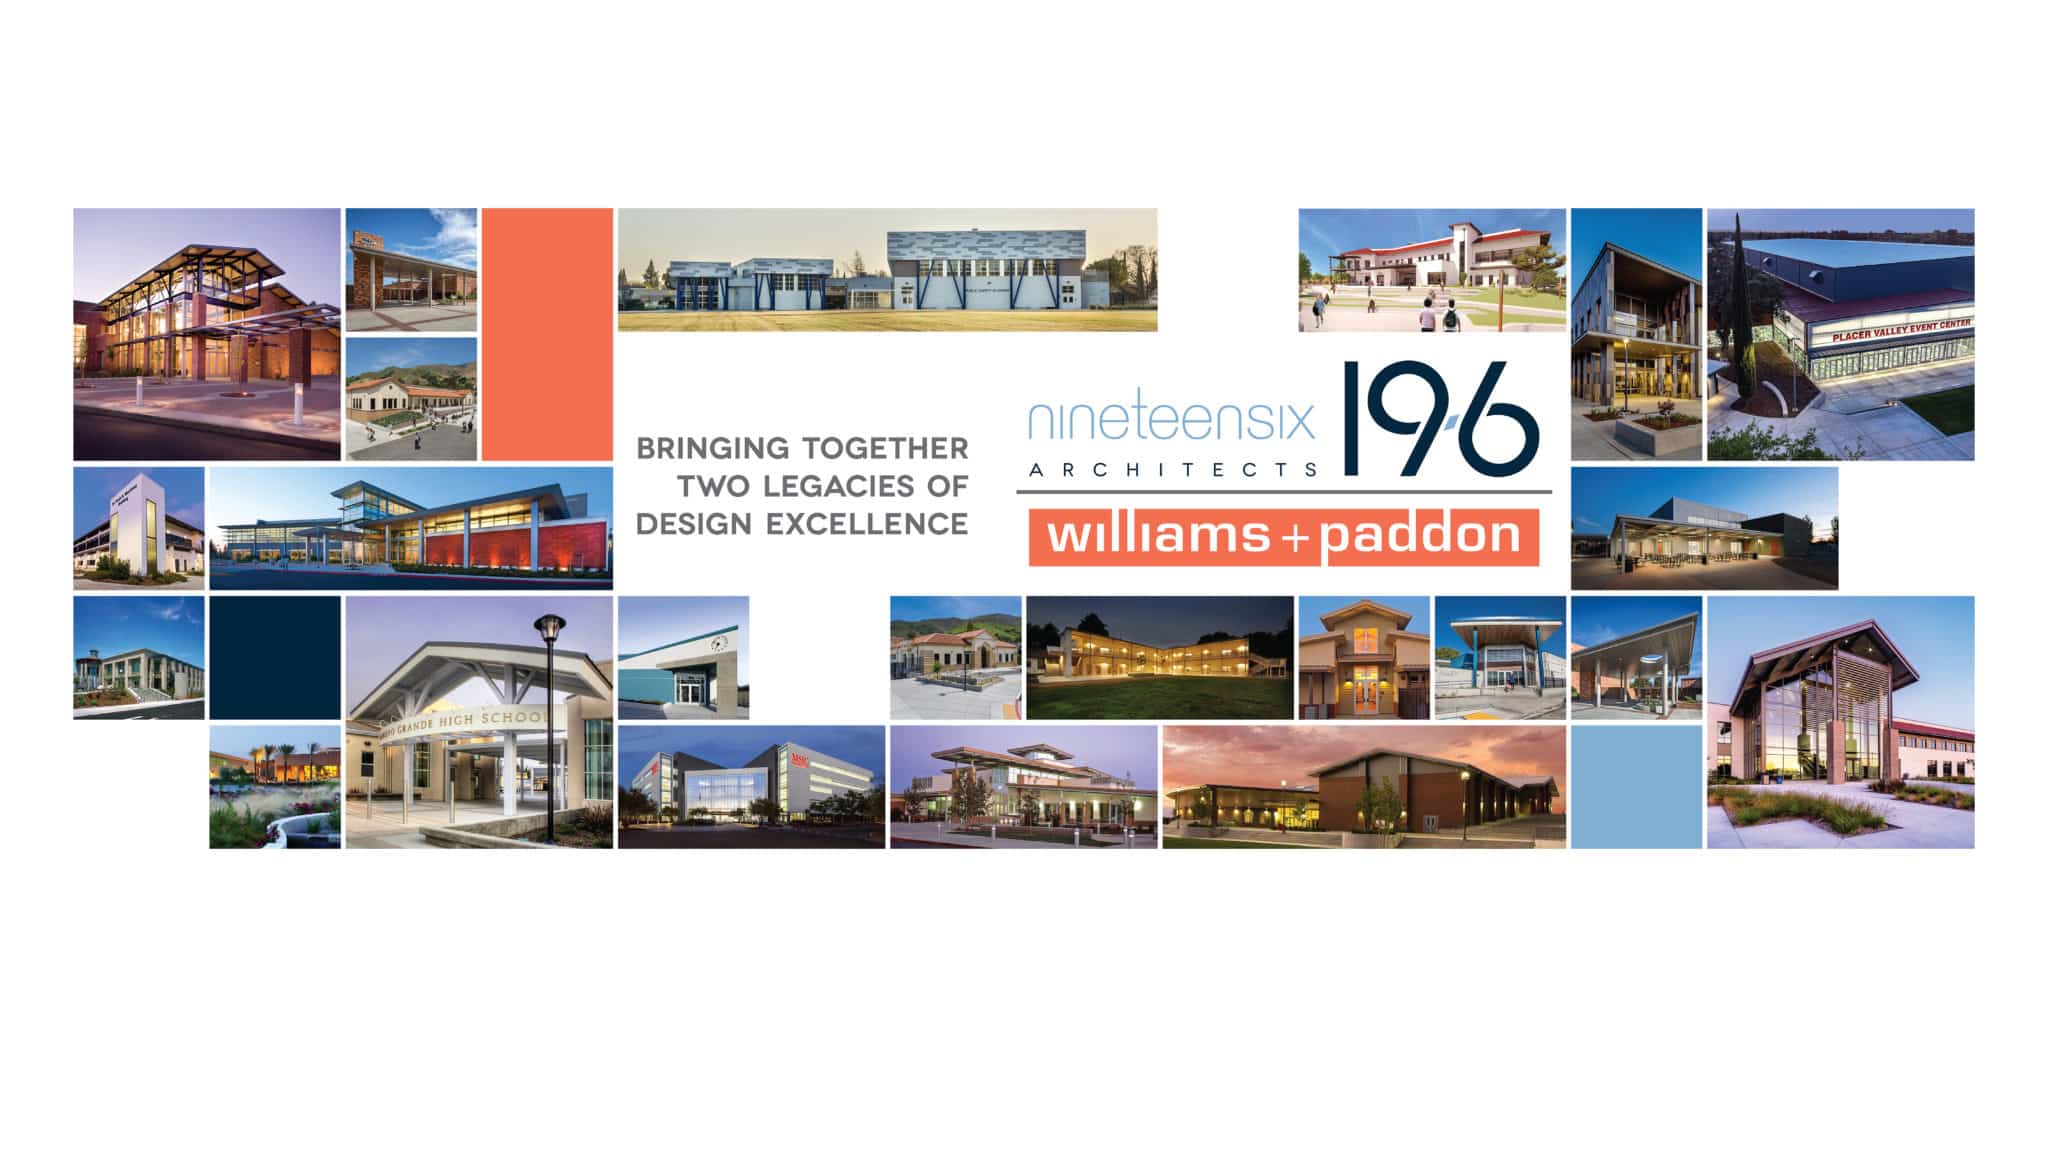 Williams + Paddon Architects + Planners Join 19six Architects